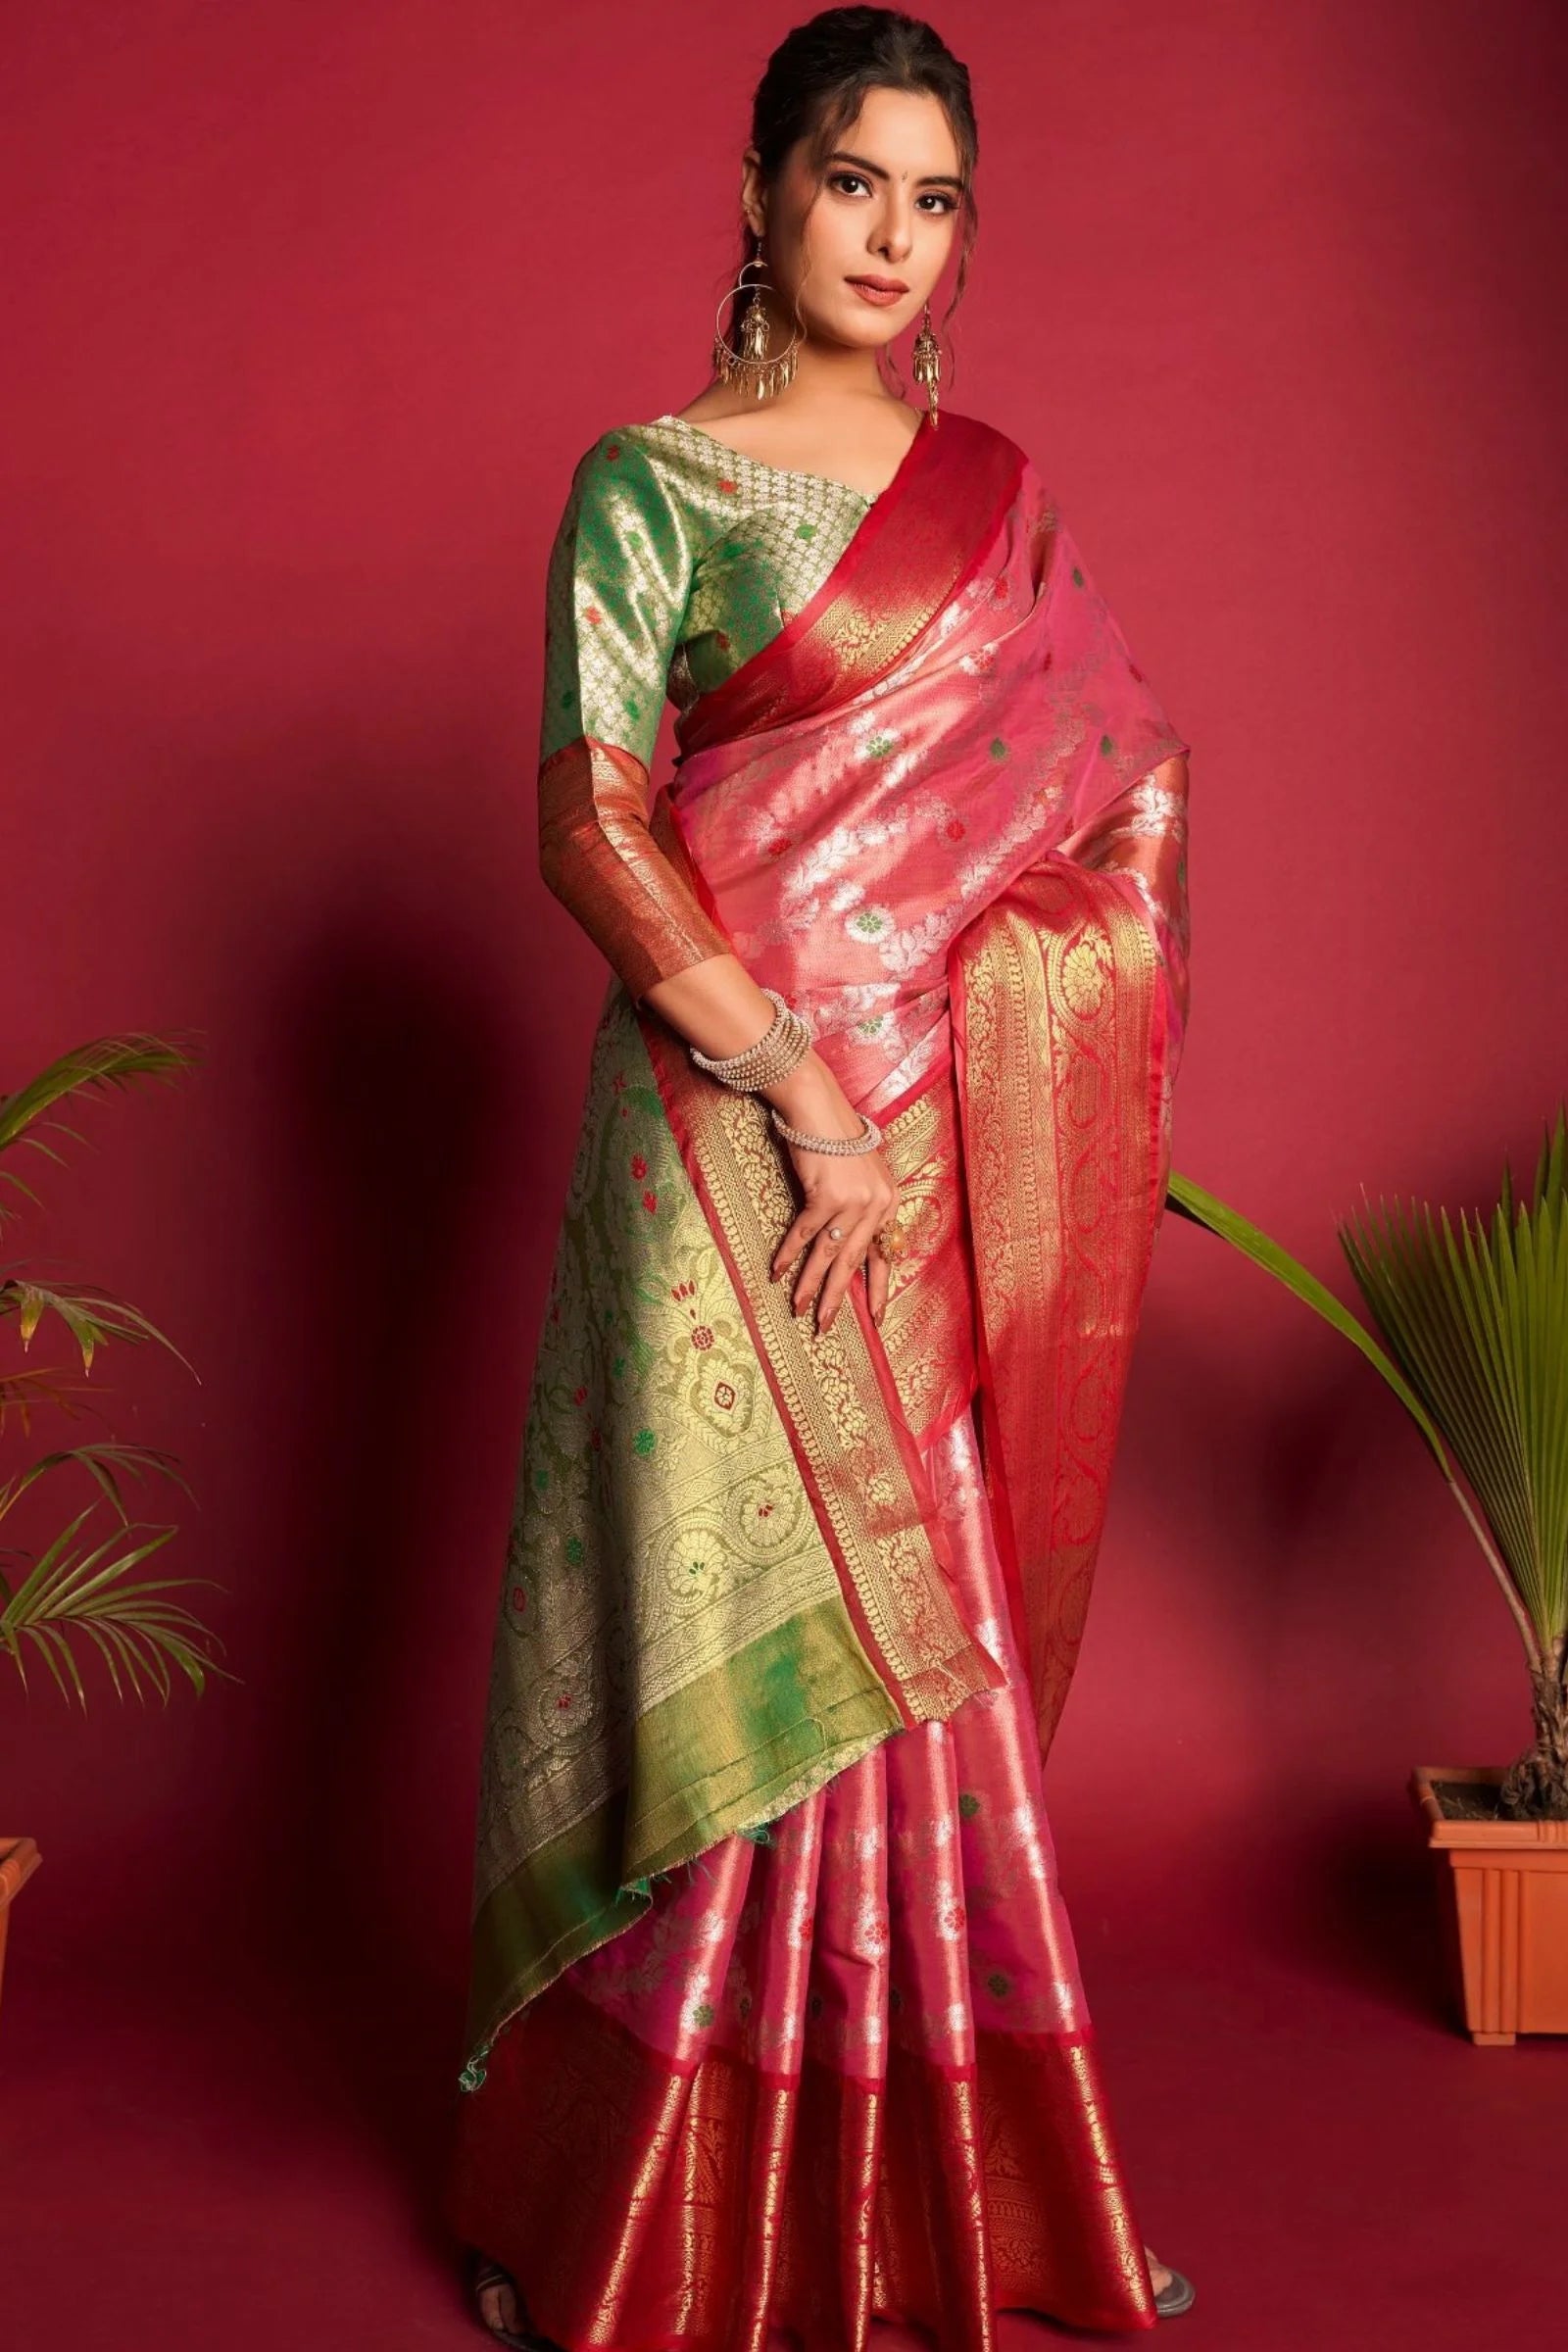 5 Latest Wedding Sarees in India that are must-haves for Brides